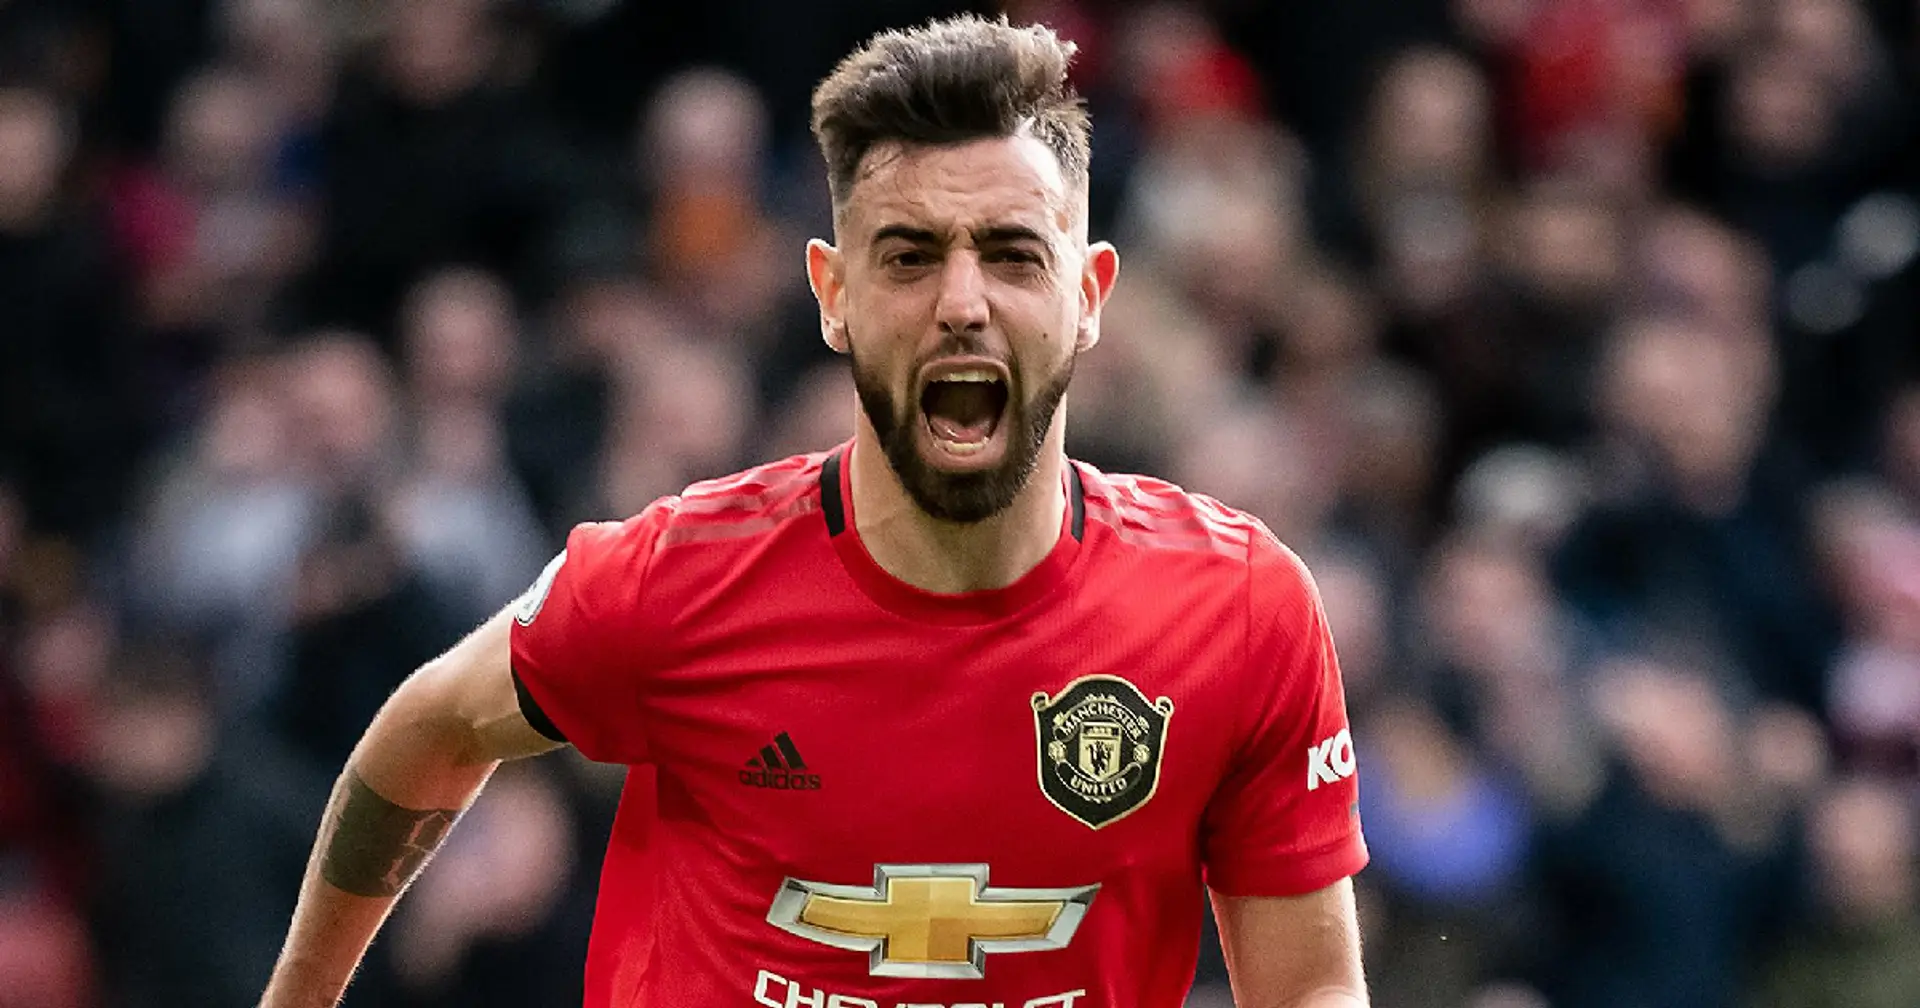 Bruno Fernandes wins Man United's Player of the Month for November: 3 key stats that show his dominance